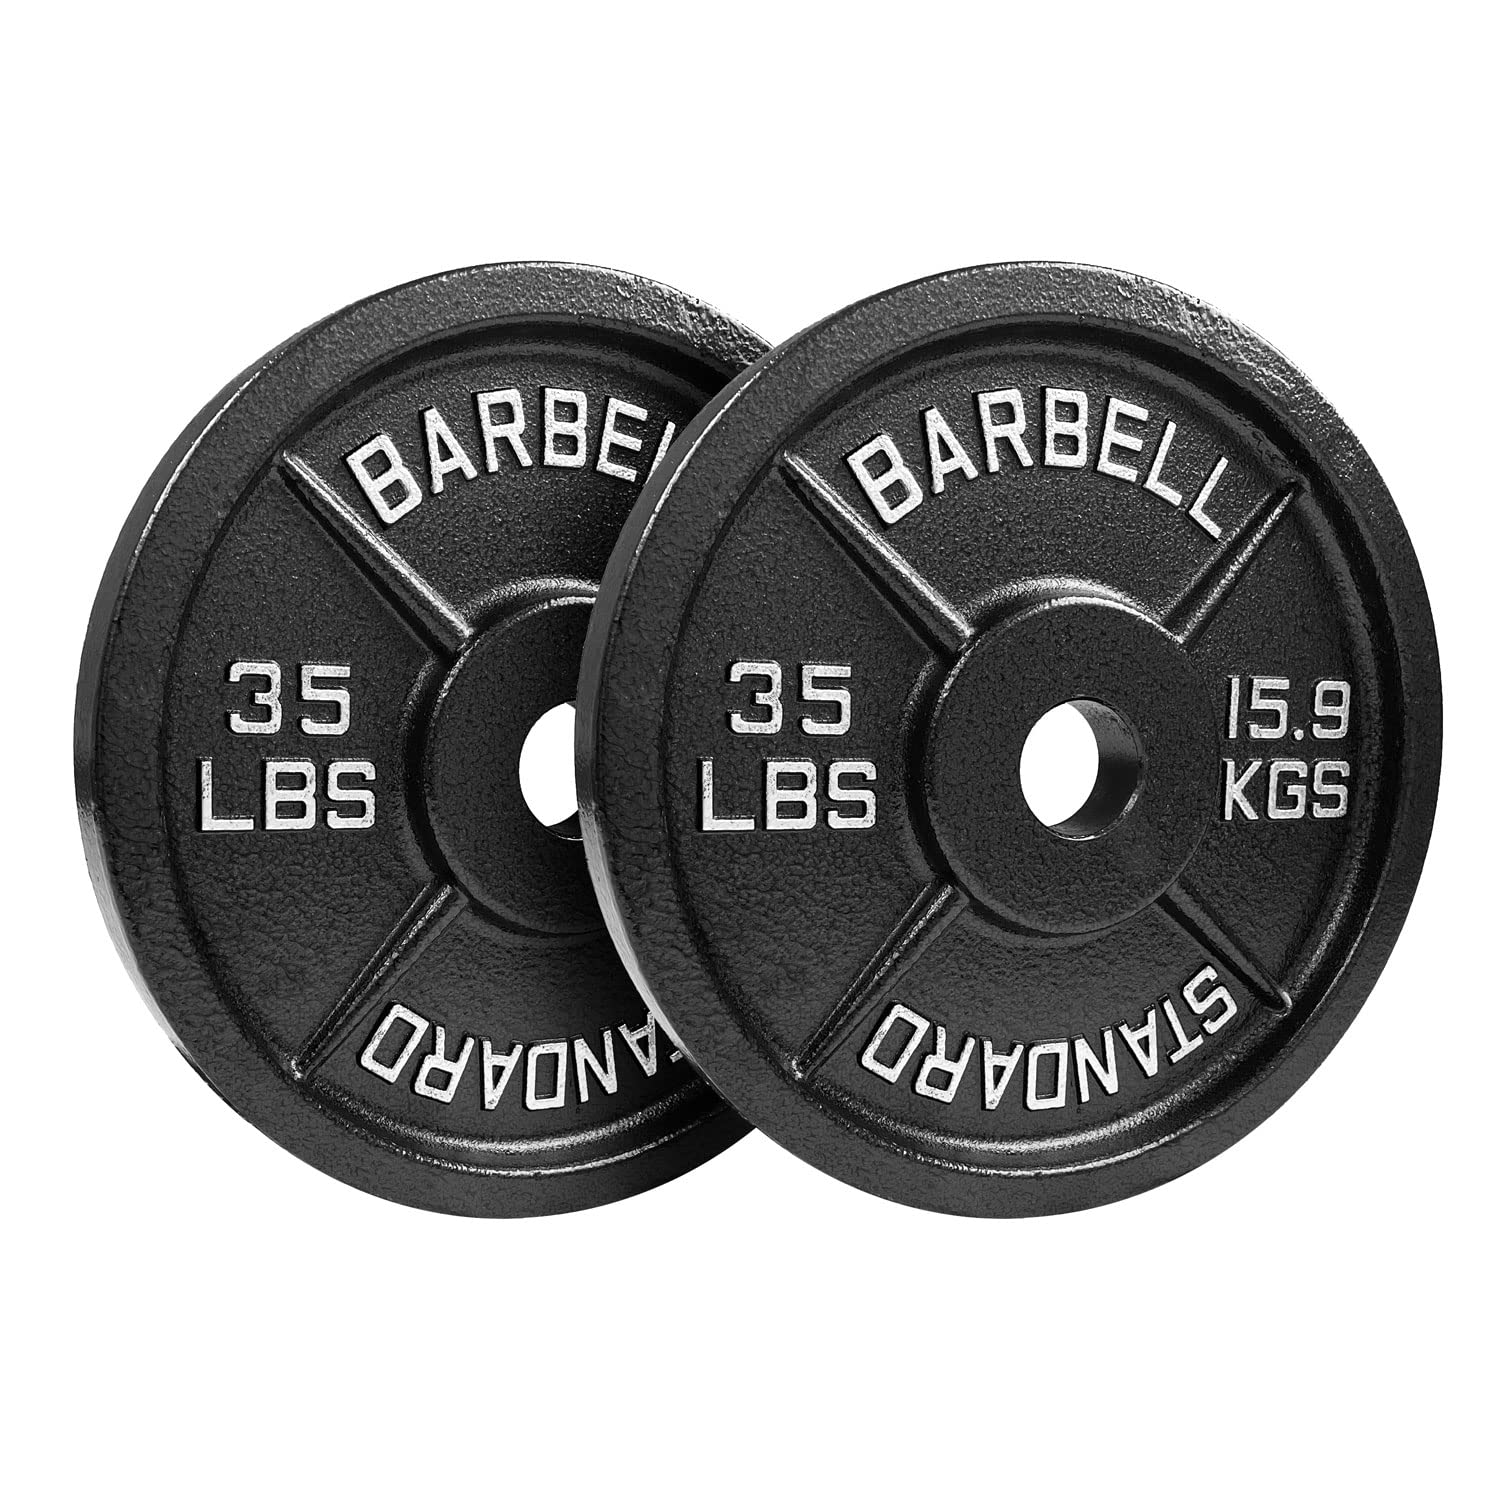 Steel Olympic Plates 35lb Pair - Olympic Standard Premium Coated 2x 35 Pound Weights